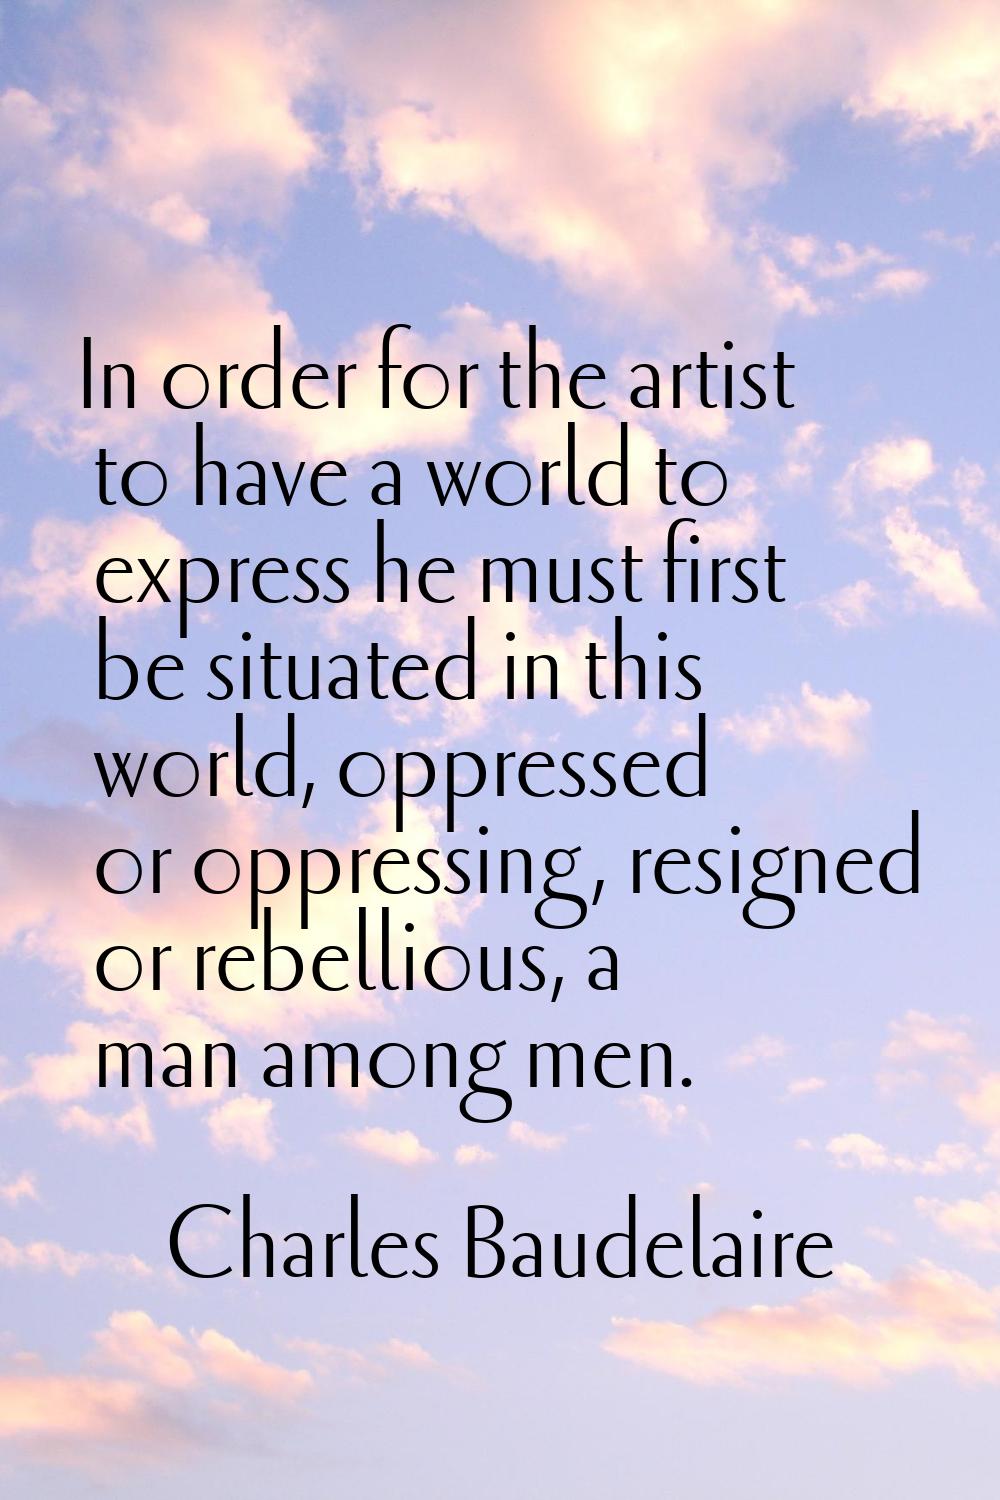 In order for the artist to have a world to express he must first be situated in this world, oppress